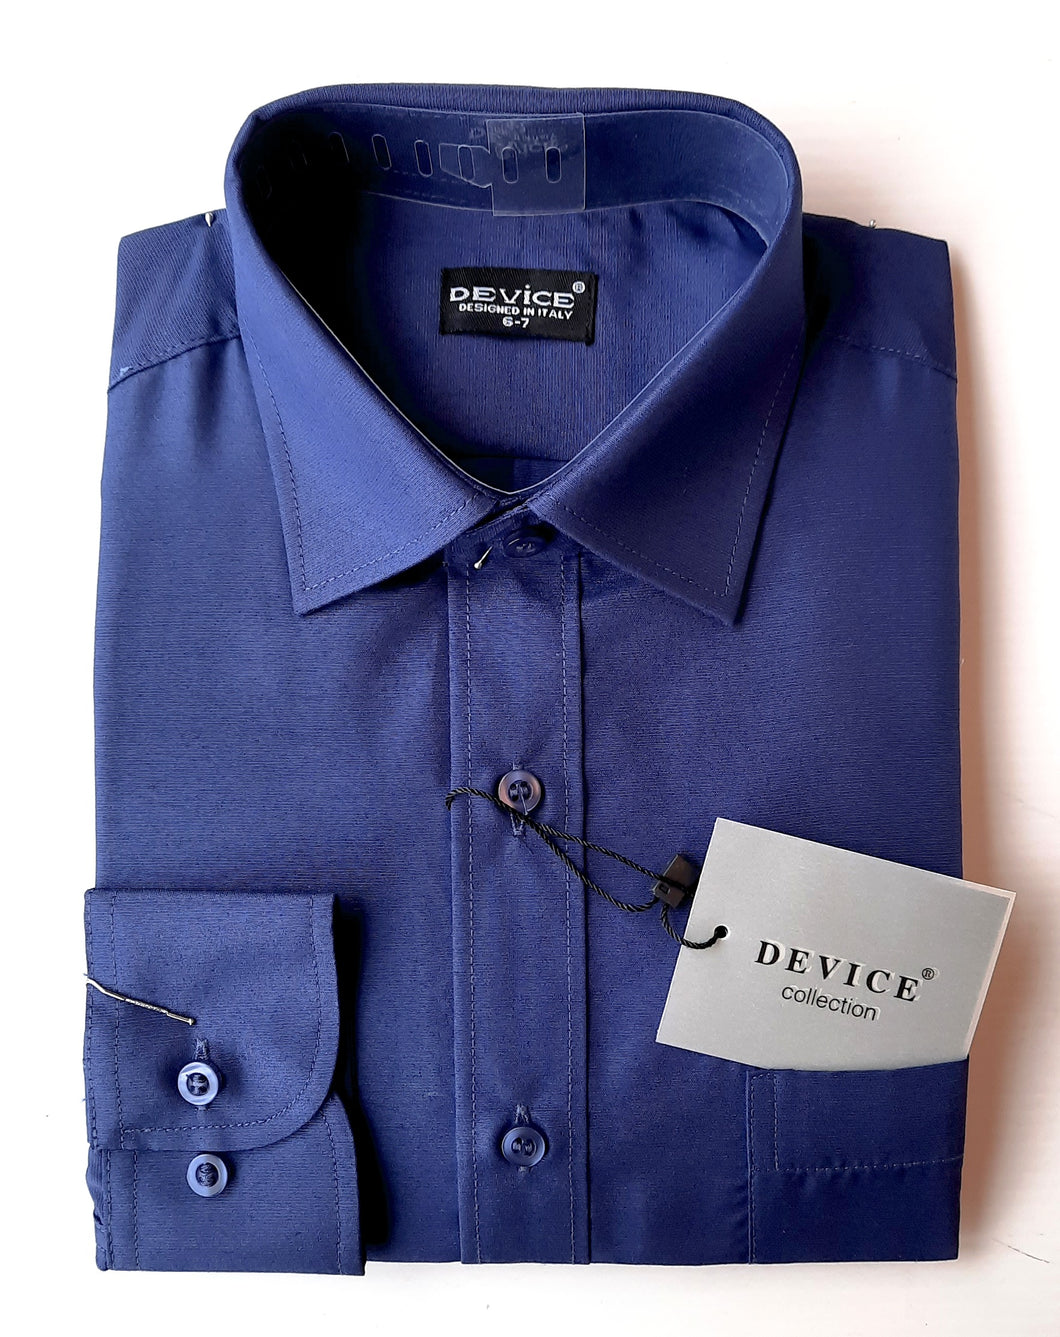 A classic, long sleeved shirt in a dark bluey- purple shade. Smooth fabric, classic non-fitted style. Two button cuff which allows for adjustment to suit. Perfect for special dressing including First Communion. Made by Device.
Size labelling is not age.
